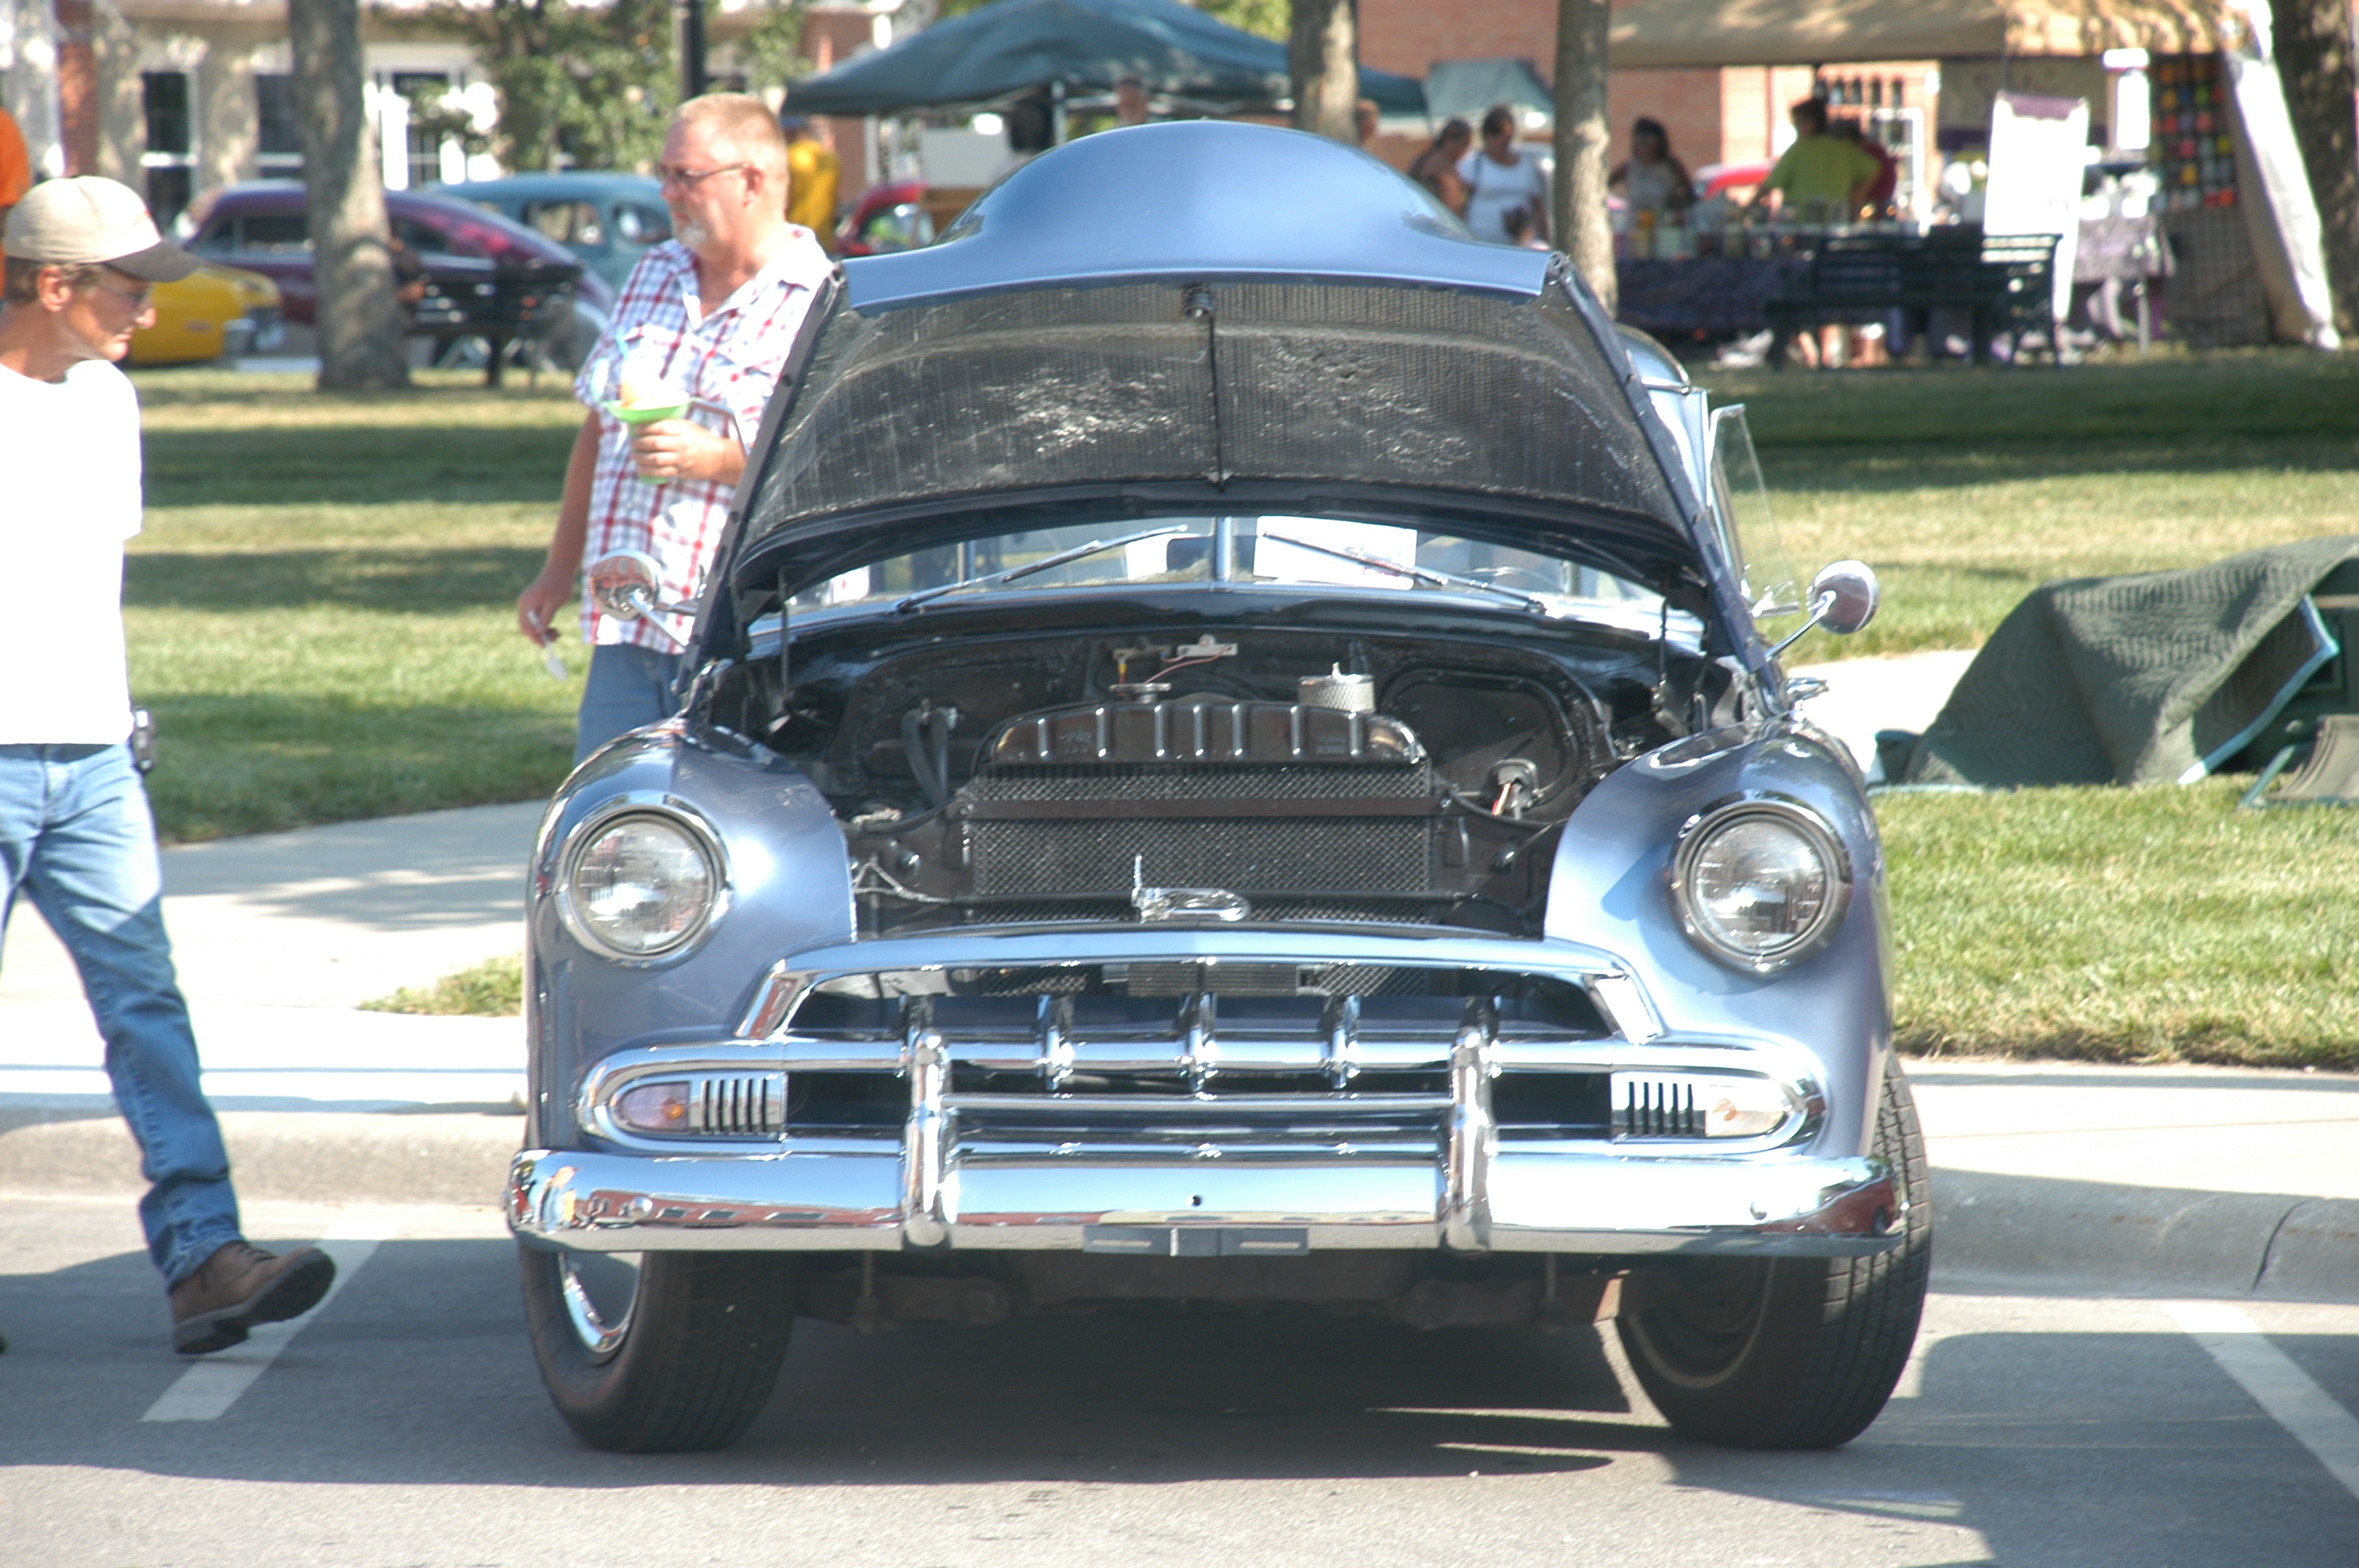 nws carSHOW 007 072011